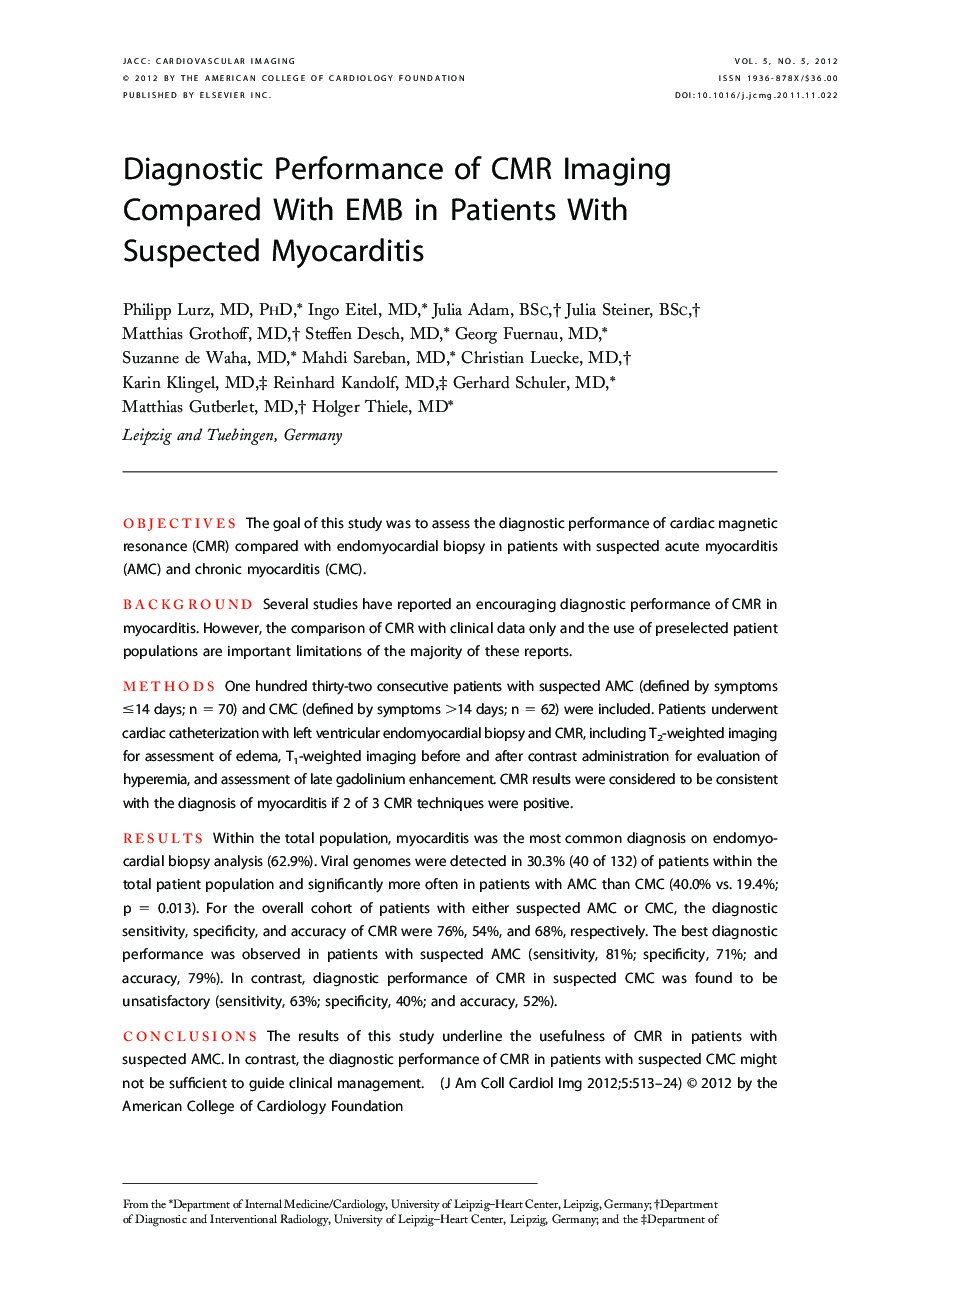 Diagnostic Performance of CMR Imaging Compared With EMB in Patients With Suspected Myocarditis 